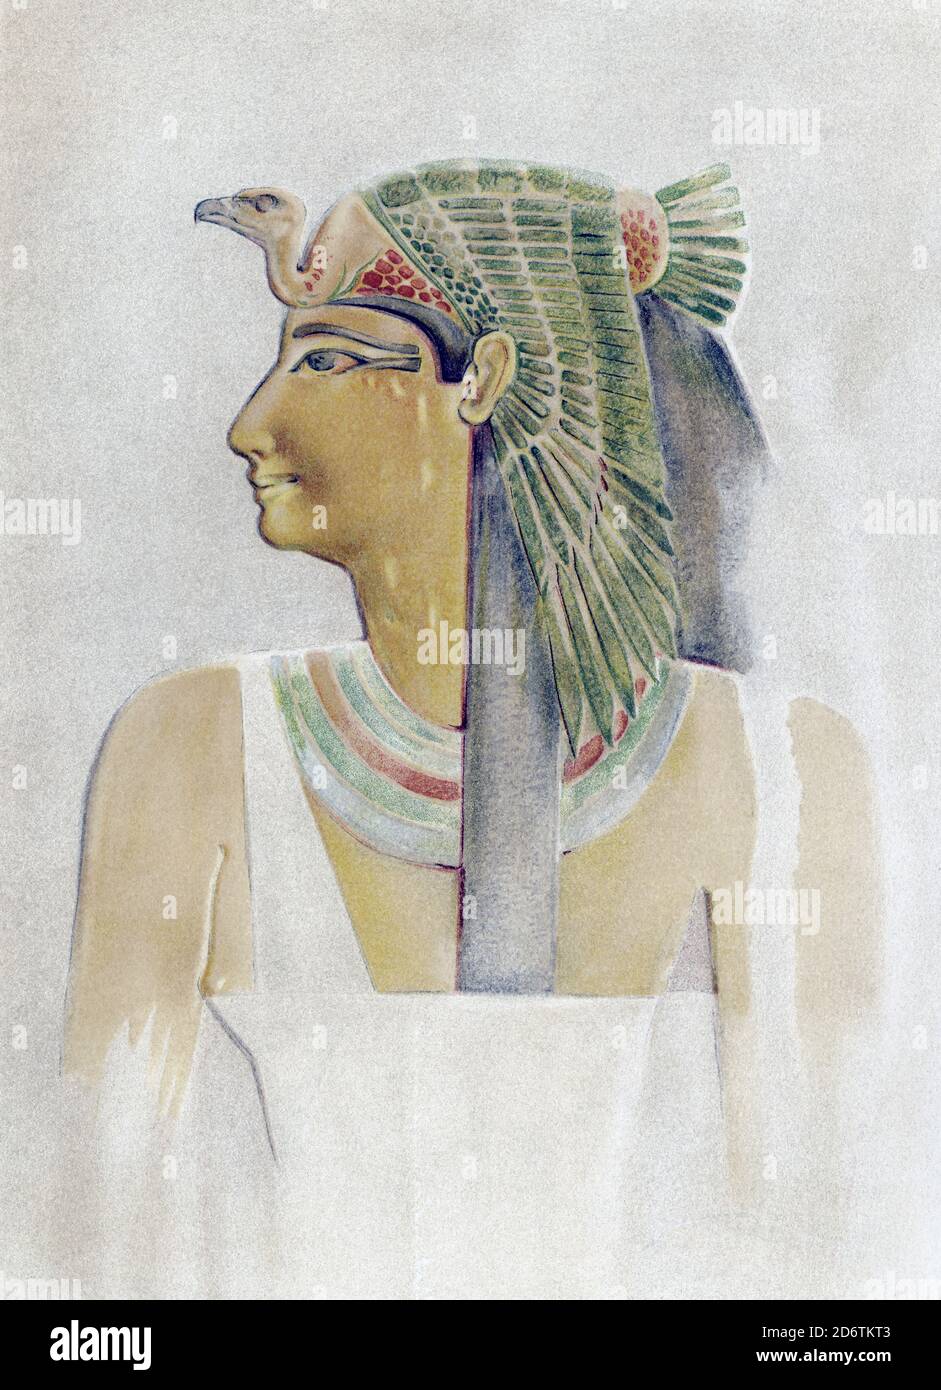 Senseneb, mother of Pharaoh Thutmose I of the early New Kingdom.   After a copy by archeologist Howard Carter of a painted relief from Deir el-Bahri, used in the book The Tomb of Hatshopsitu by Theodore M. Davis, published in London, 1906. Stock Photo